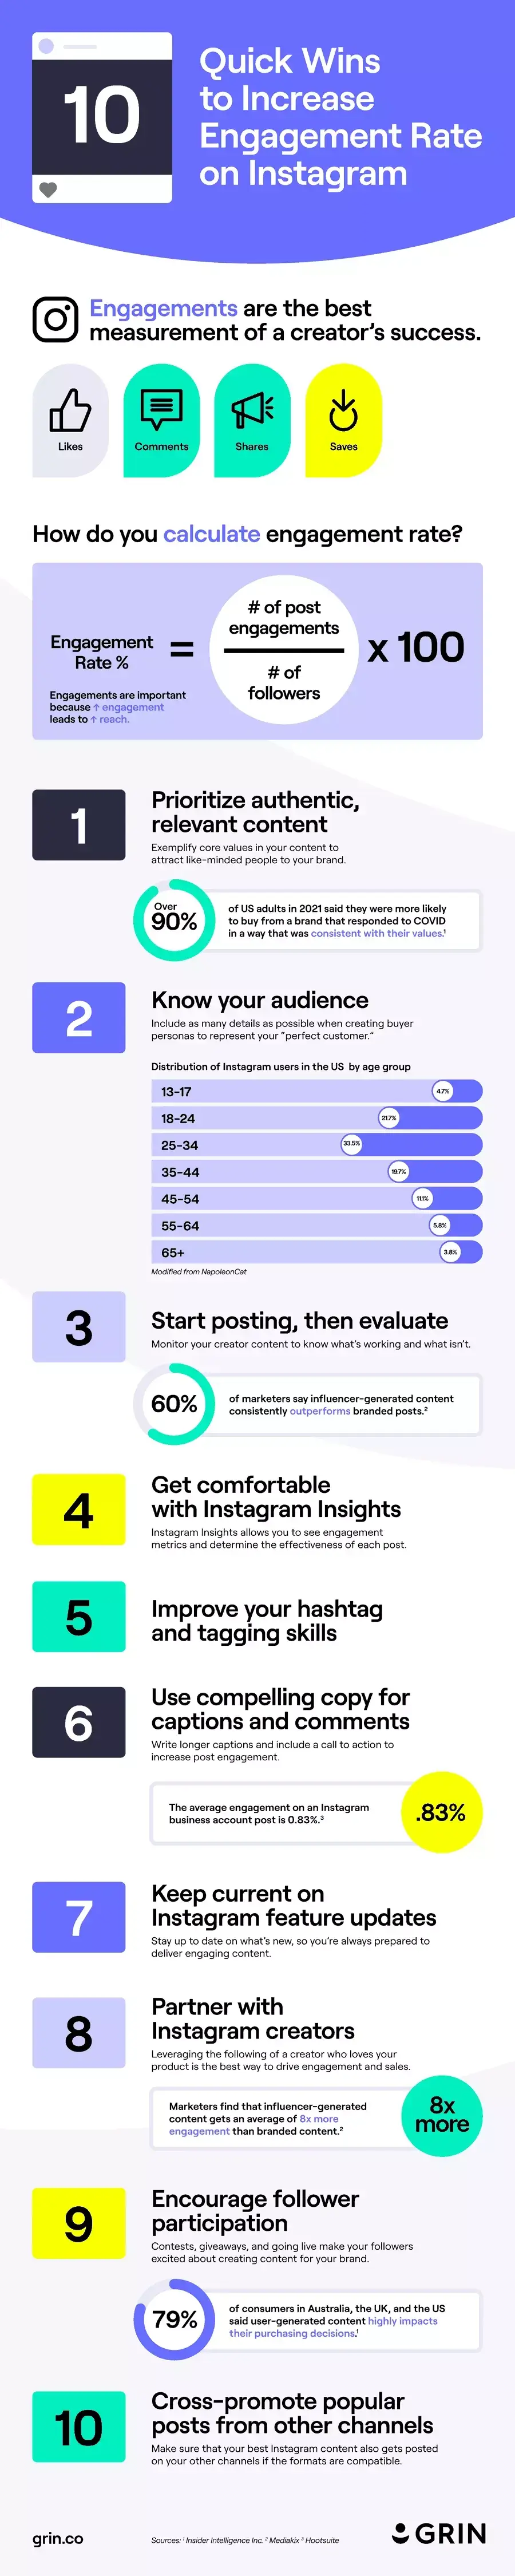 Infographic of "How to improve your Instagram engagement rate"